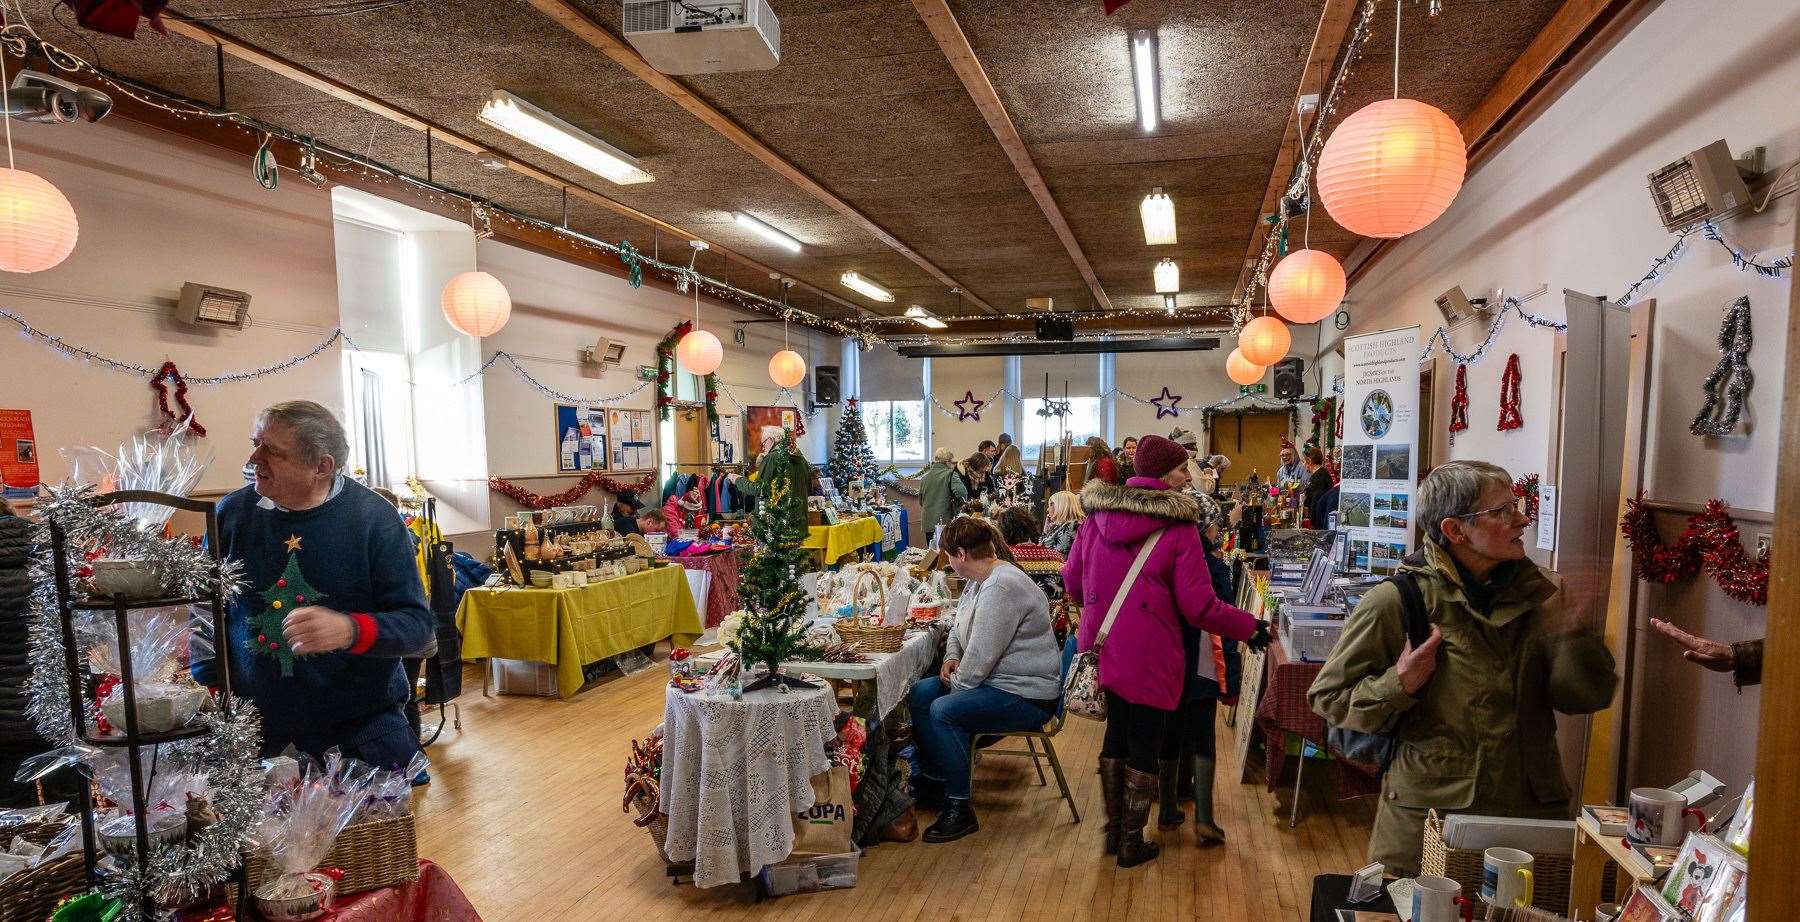 Managers of Dornoch Social Club made sure it was looking its festive best for the indoor market, with a Christmas tree, tinsel and starts. Picture: Andy Kirby